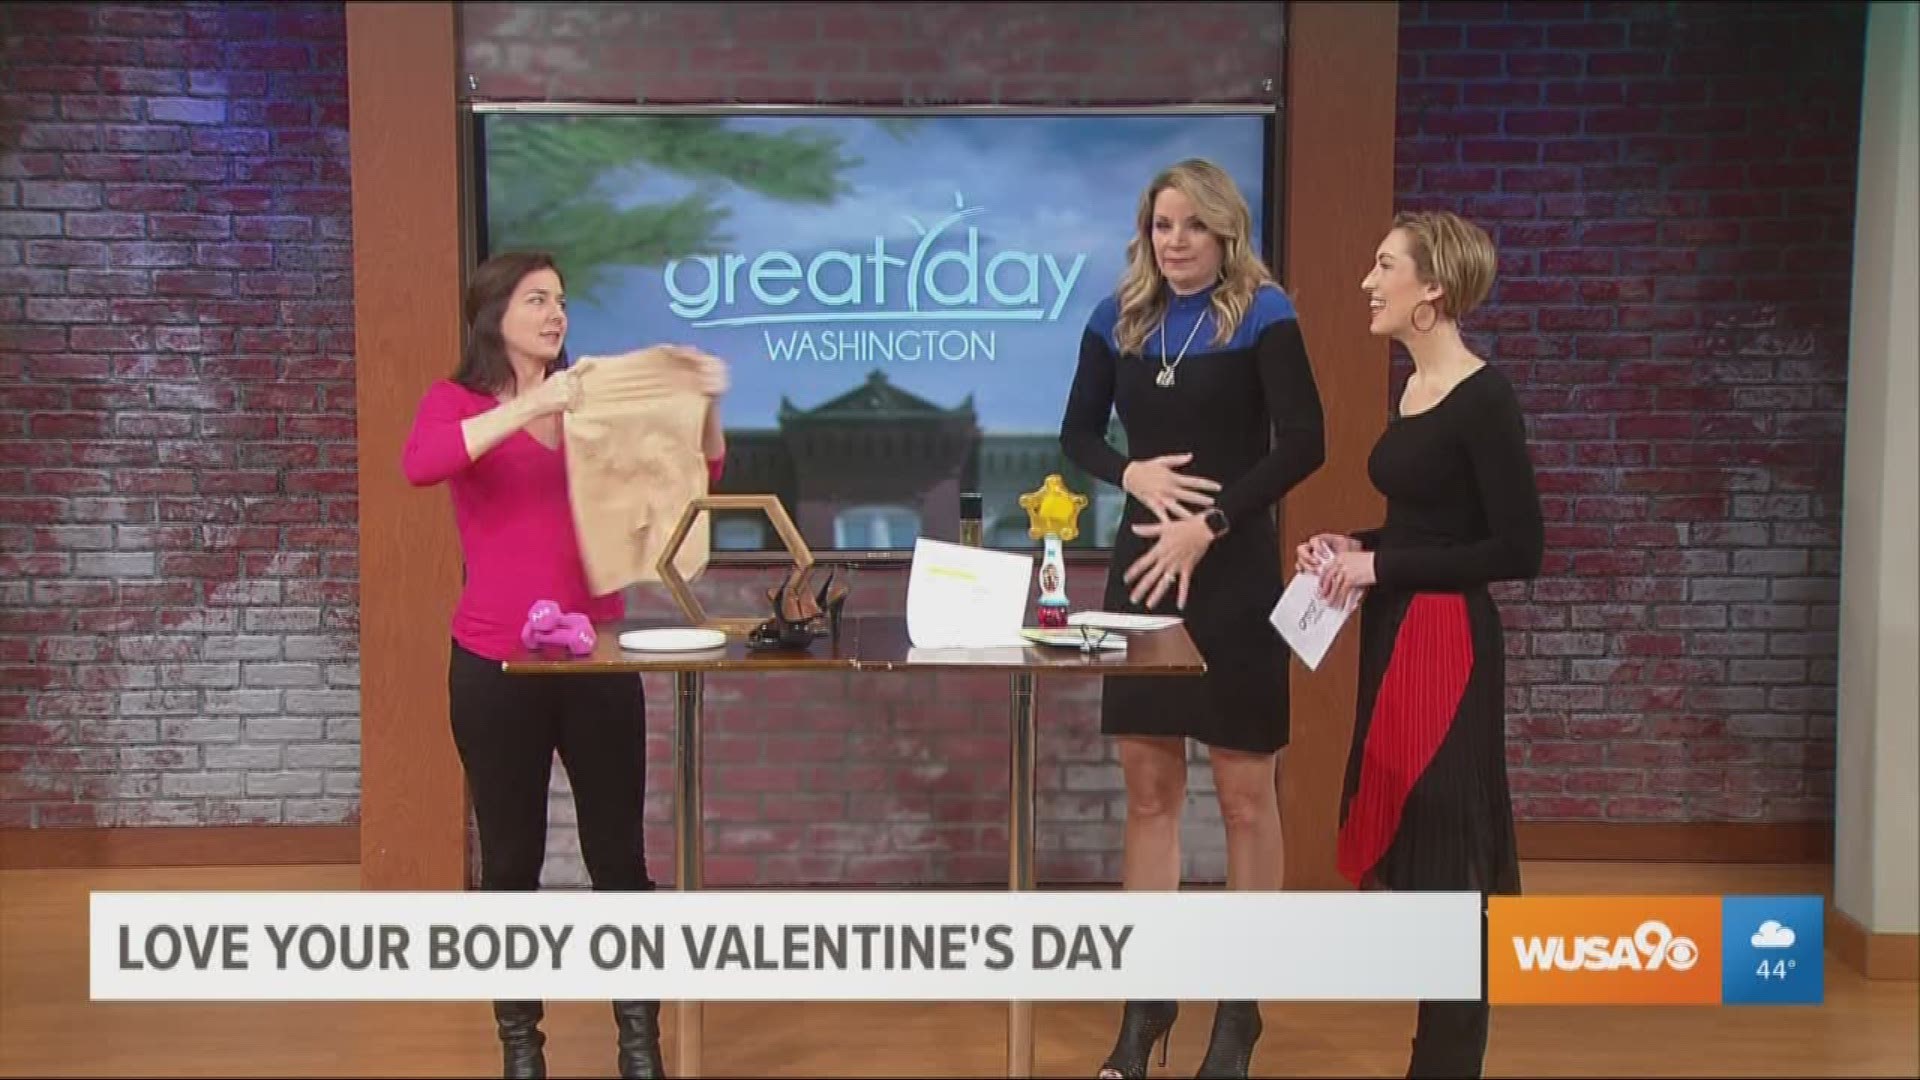 Motivational speaker and author, Patty Alfonso has mistakes to avoid and tips to loving your body every day of the year!